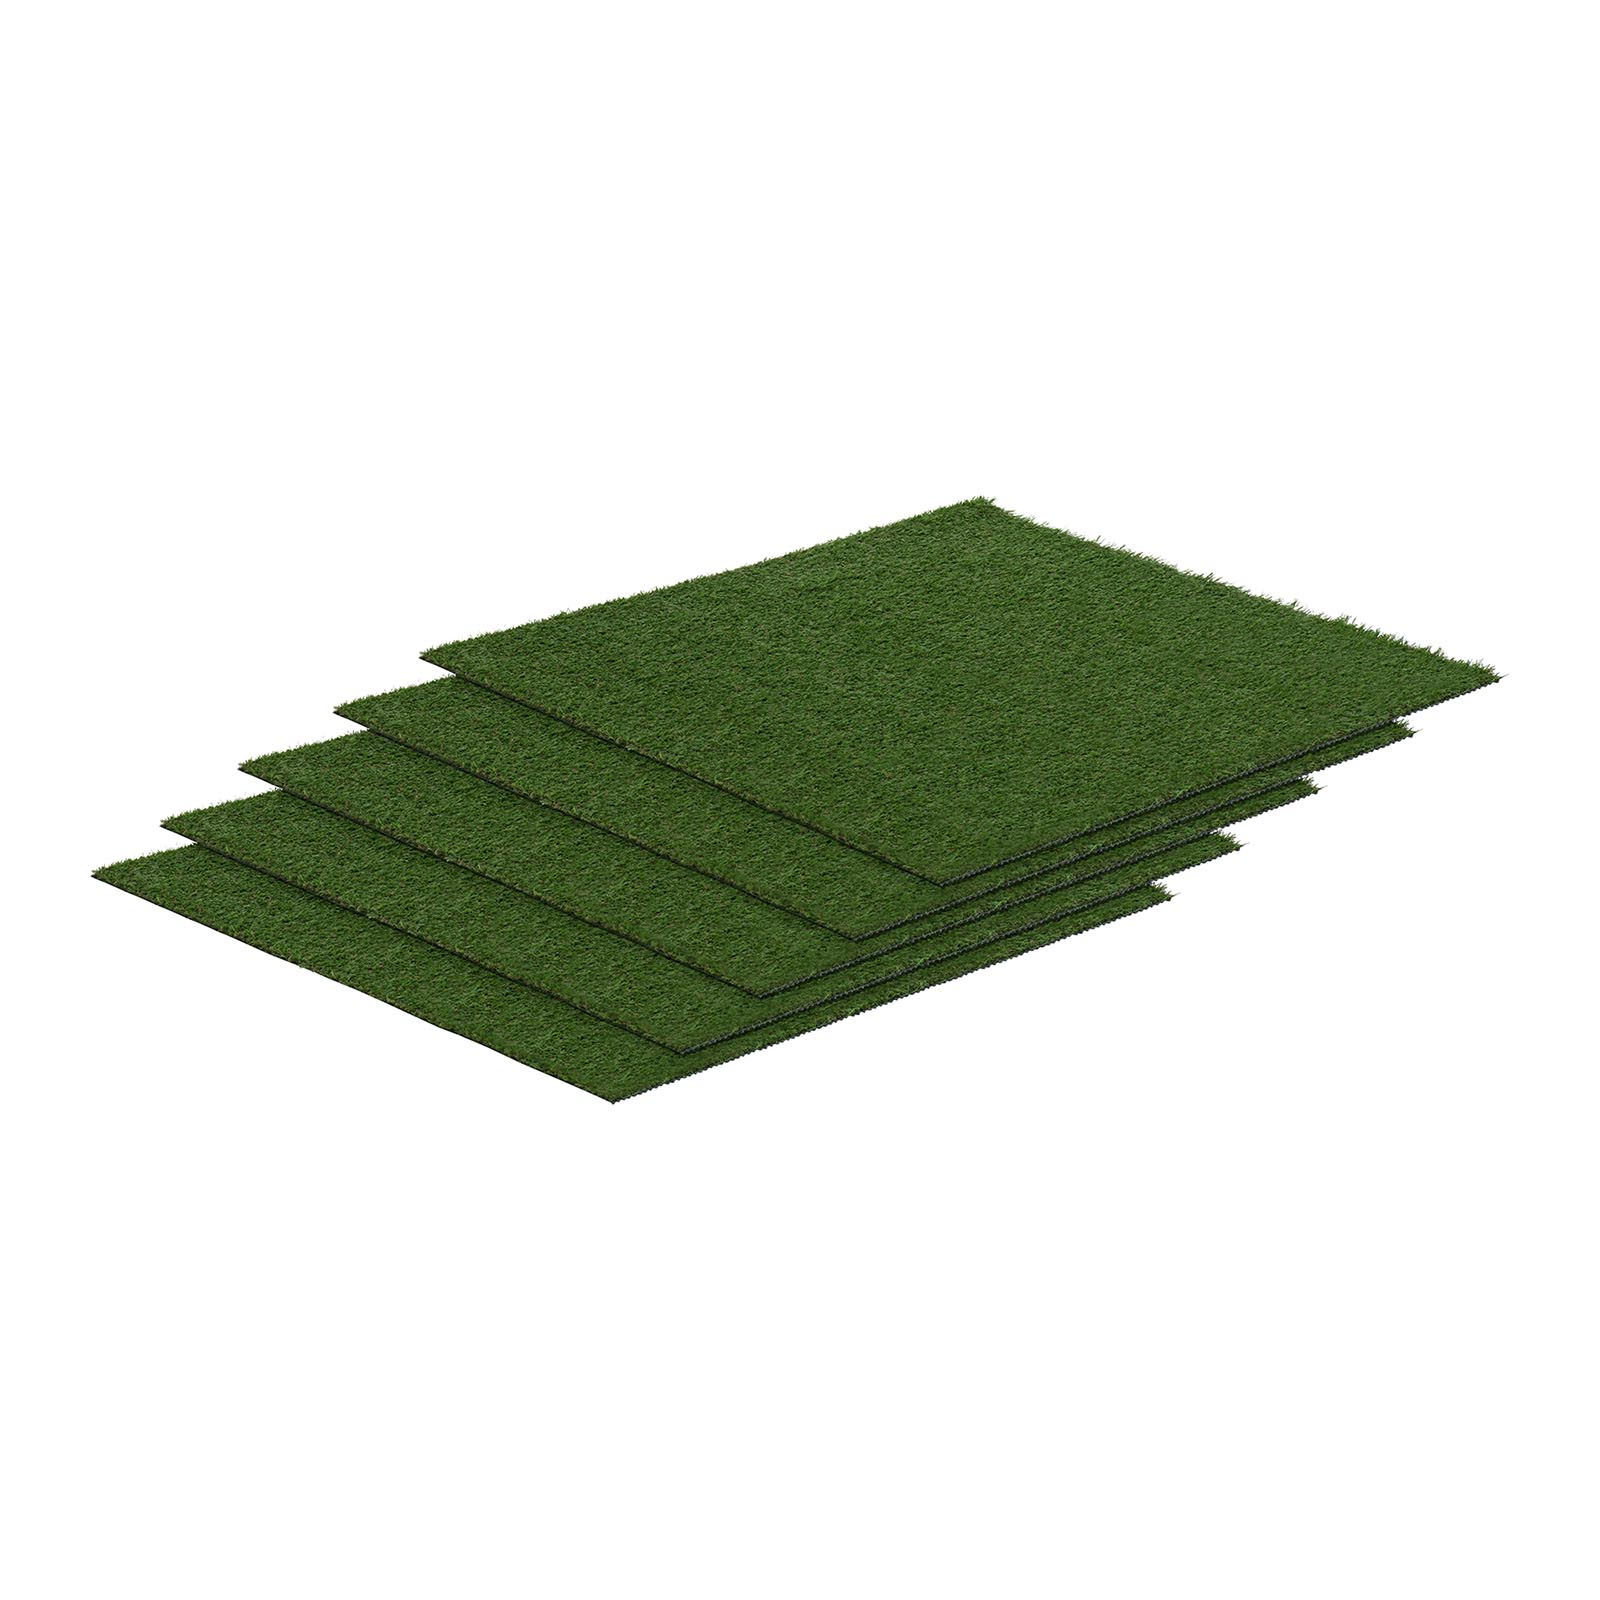 Artificial grass - Set of 5 - 100 x 100 cm - Height: 20 mm - Stitch rate: 13/10 cm - UV-resistant